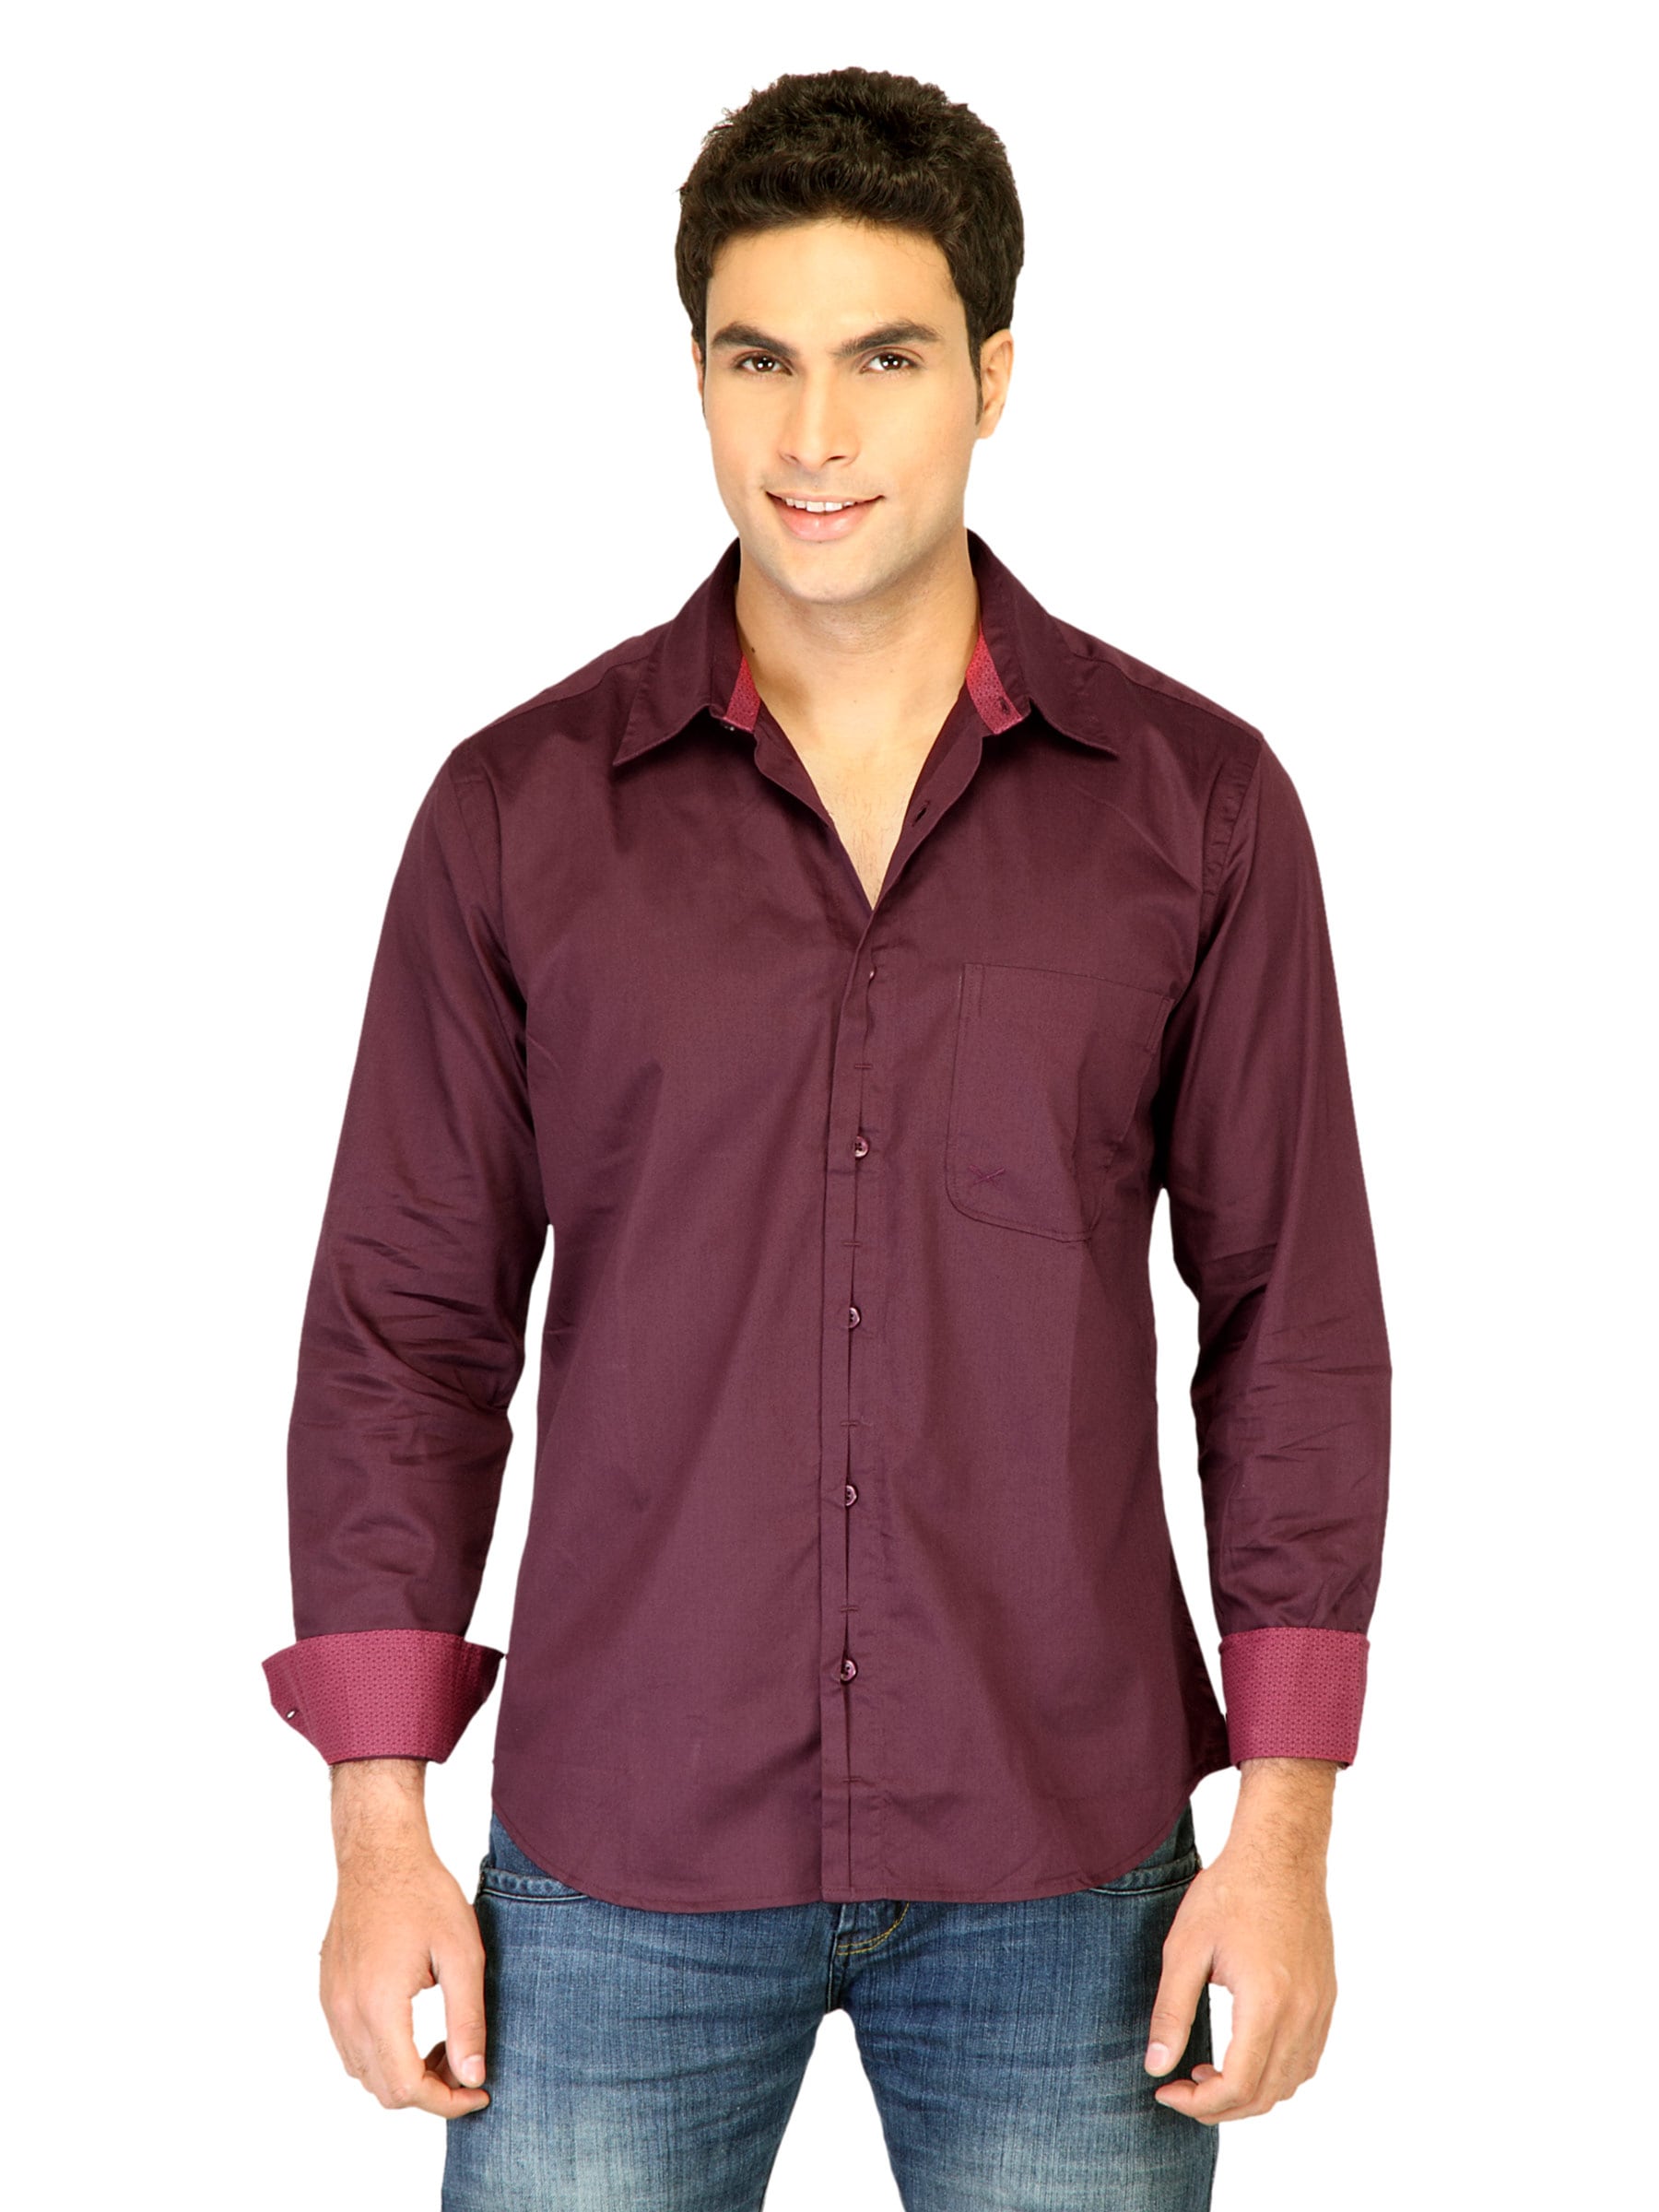 Scullers Men Solid Maroon Shirts